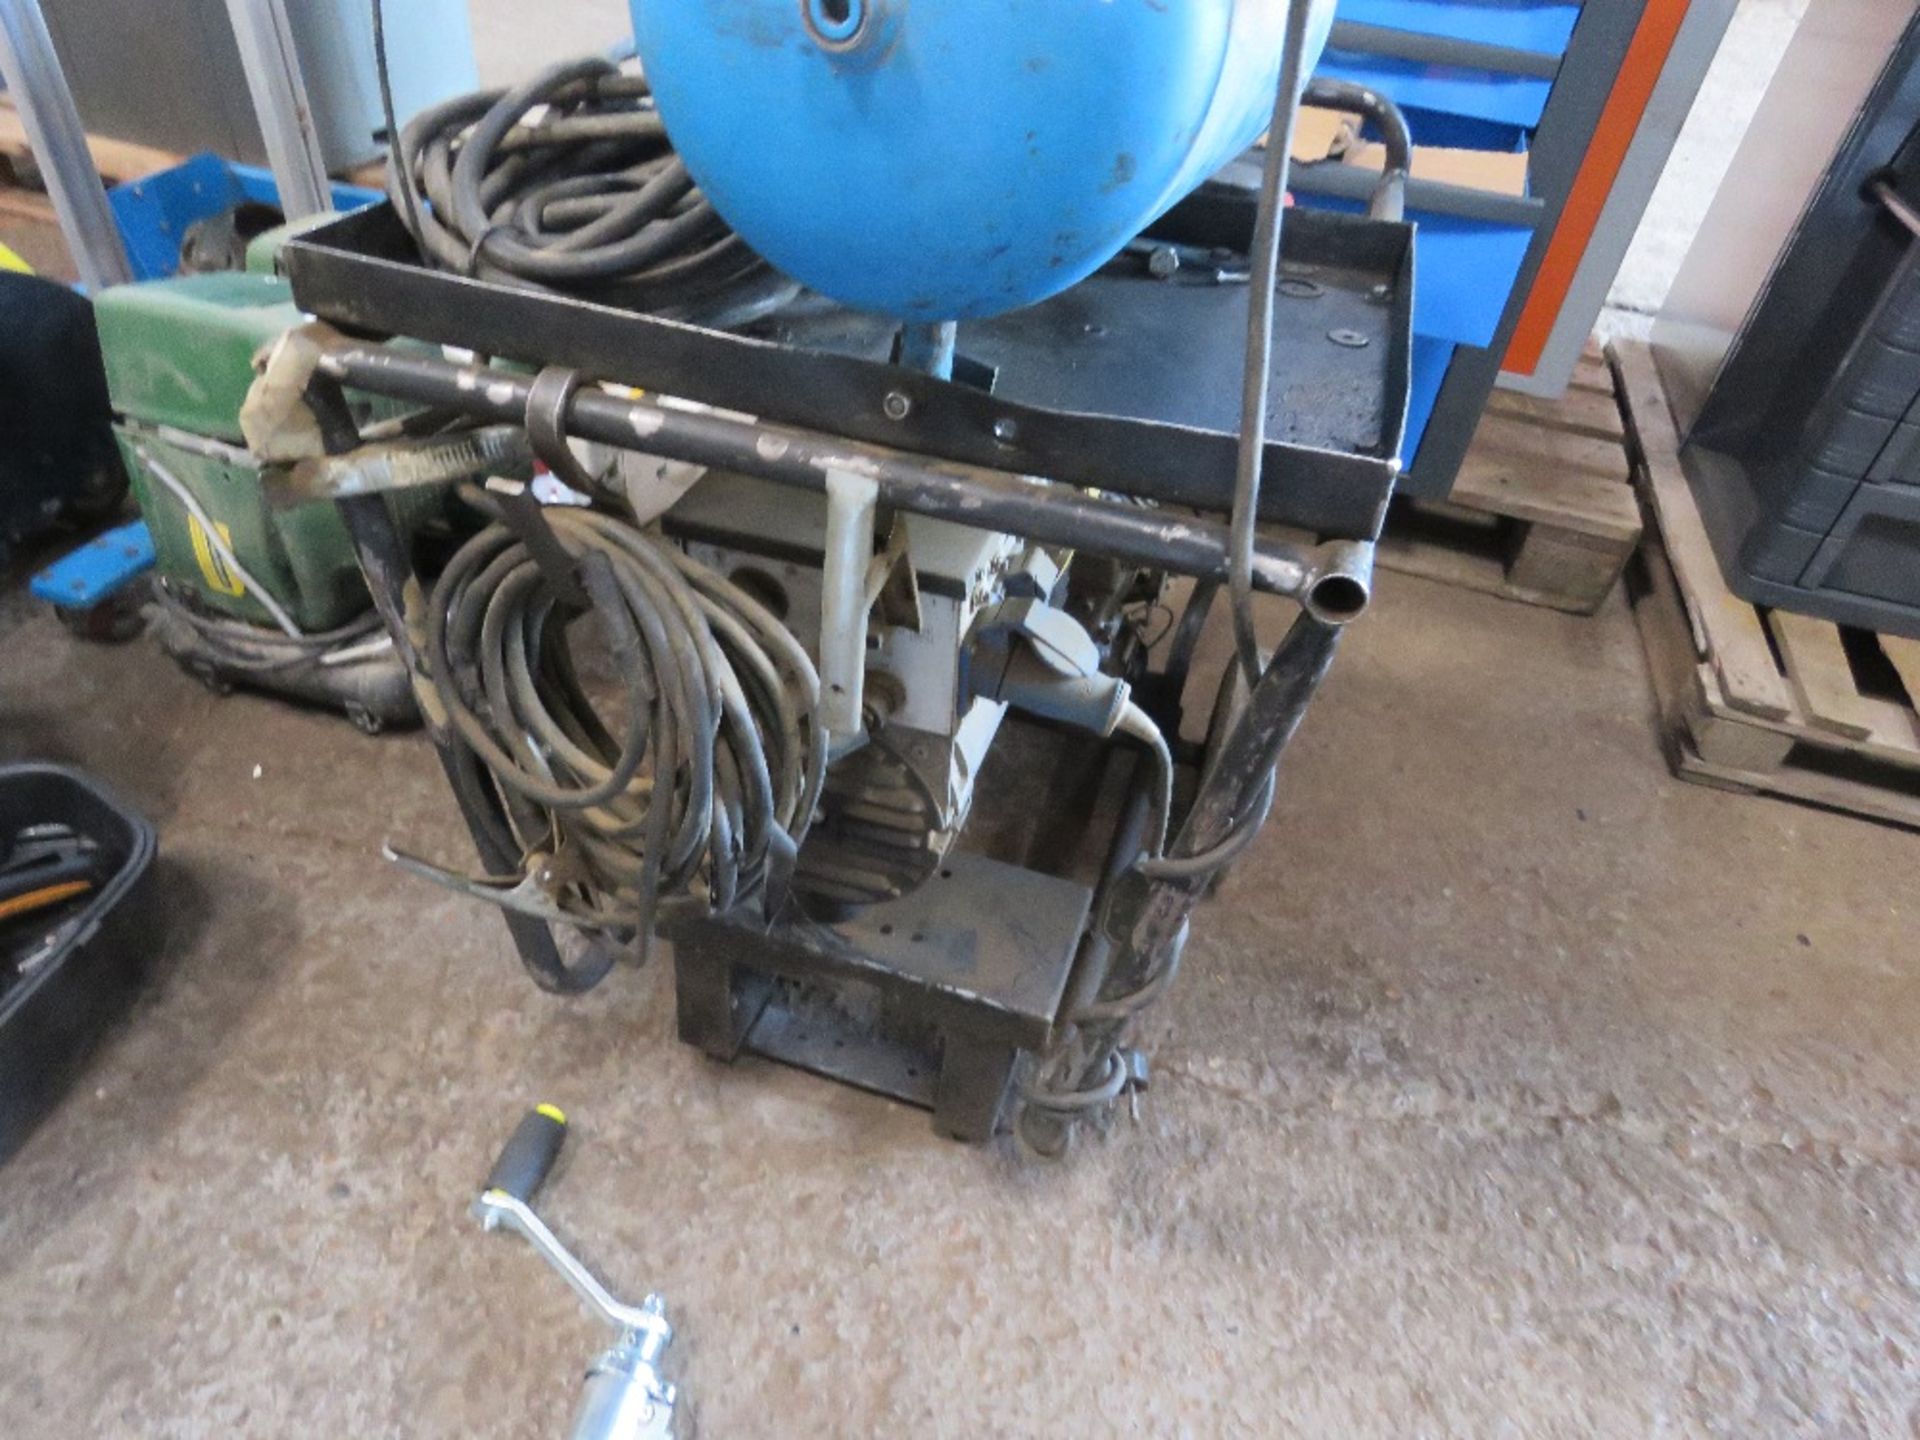 YANMAR DIESEL ENGINED WELDER GENERATOR WITH LEADS AND A SMALL COMPRESSOR FITTED. - Image 2 of 4